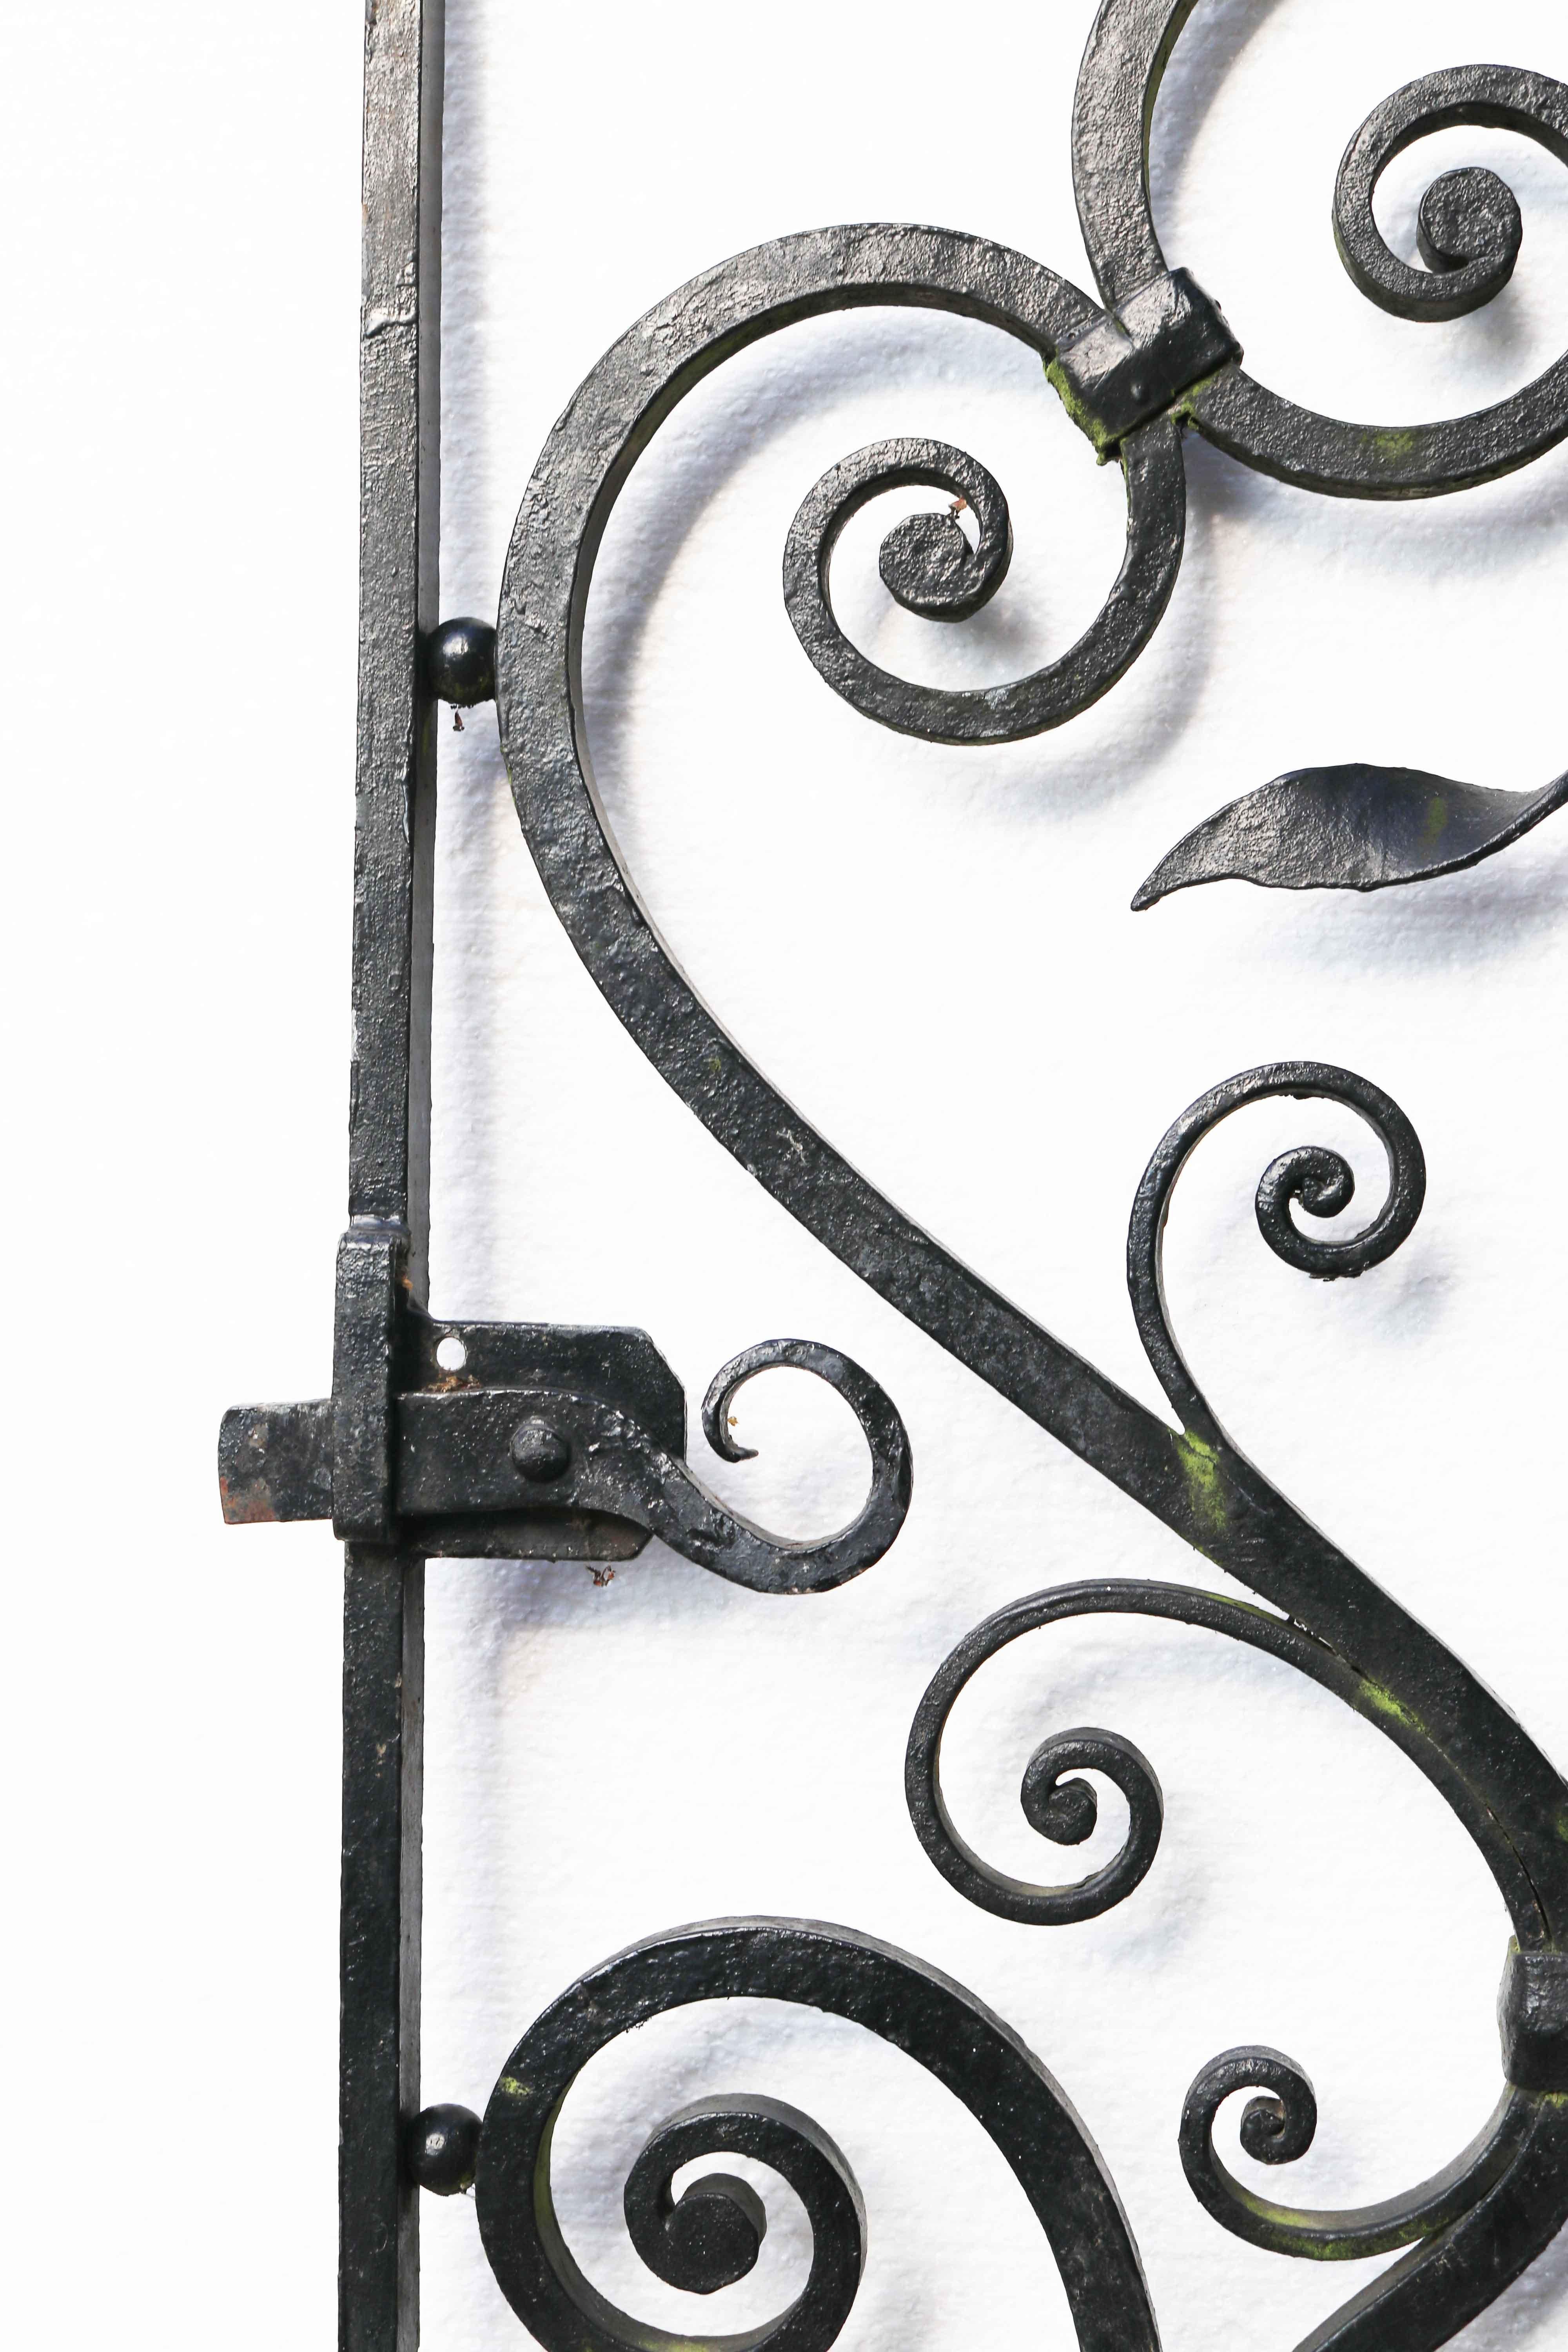 A good quality reclaimed wrought iron garden gate. Blacksmith made. This is one of three similar gates reclaimed from a property in Oxfordshire.